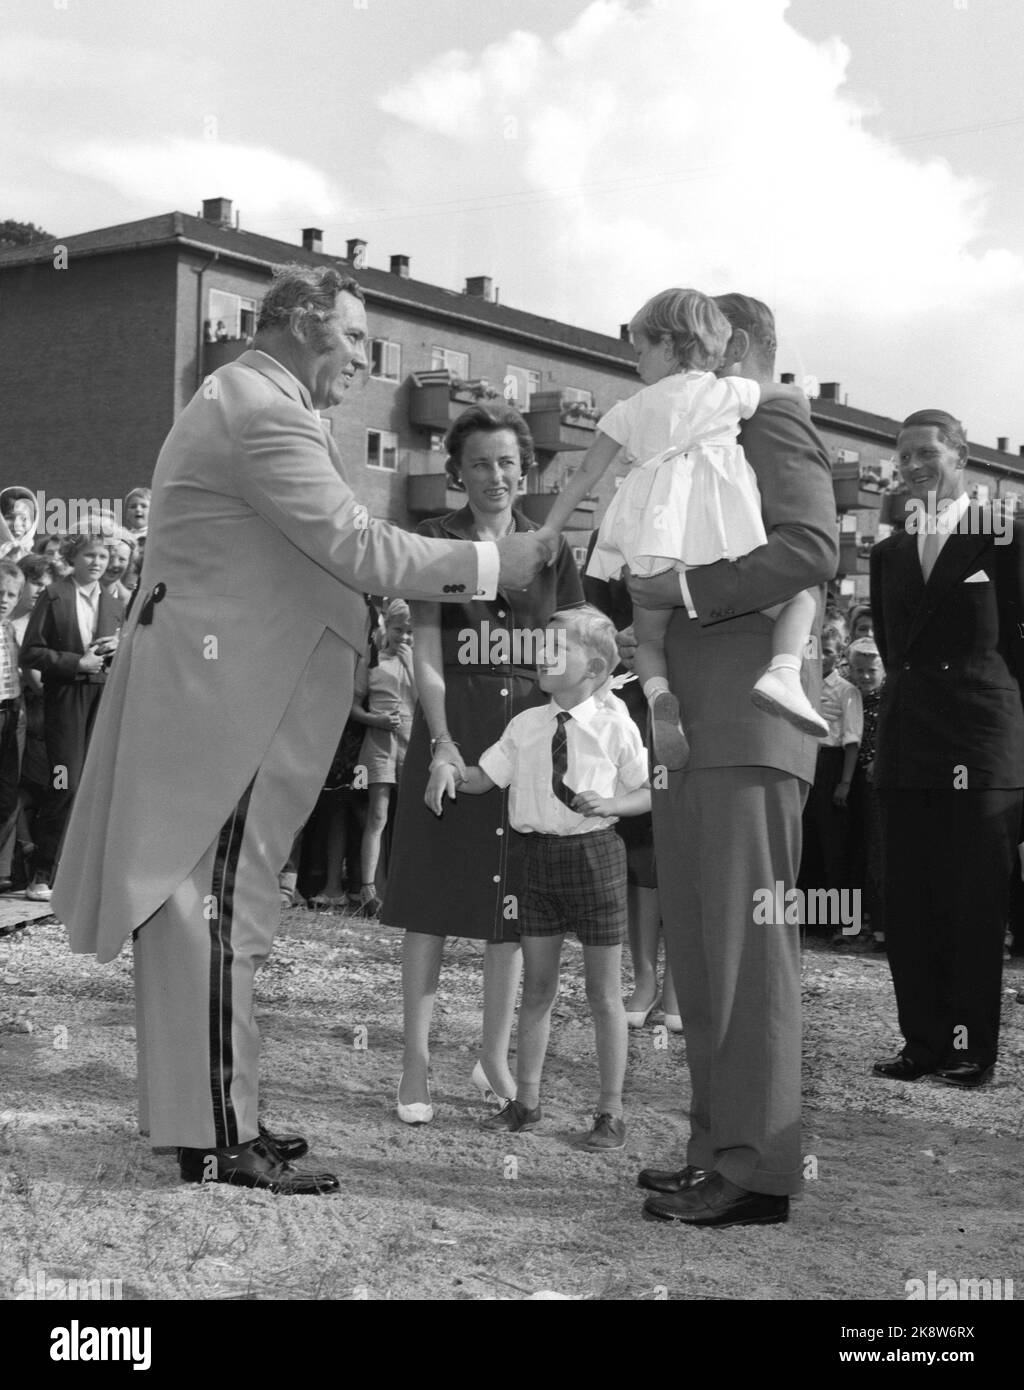 Oslo 19600903. The entire Norwegian Circus Director Arnardo invited Princess Ragnhild and her family to one of her performances in Oslo. Here on the way into the circus tent where circus director Arnardo (t.v.) greeted the royal princess Ragnhild her husband Erling Lorentzen, children Ingeborg and Haakon. Photo: Ivar Aaserud Current / NTB Stock Photo